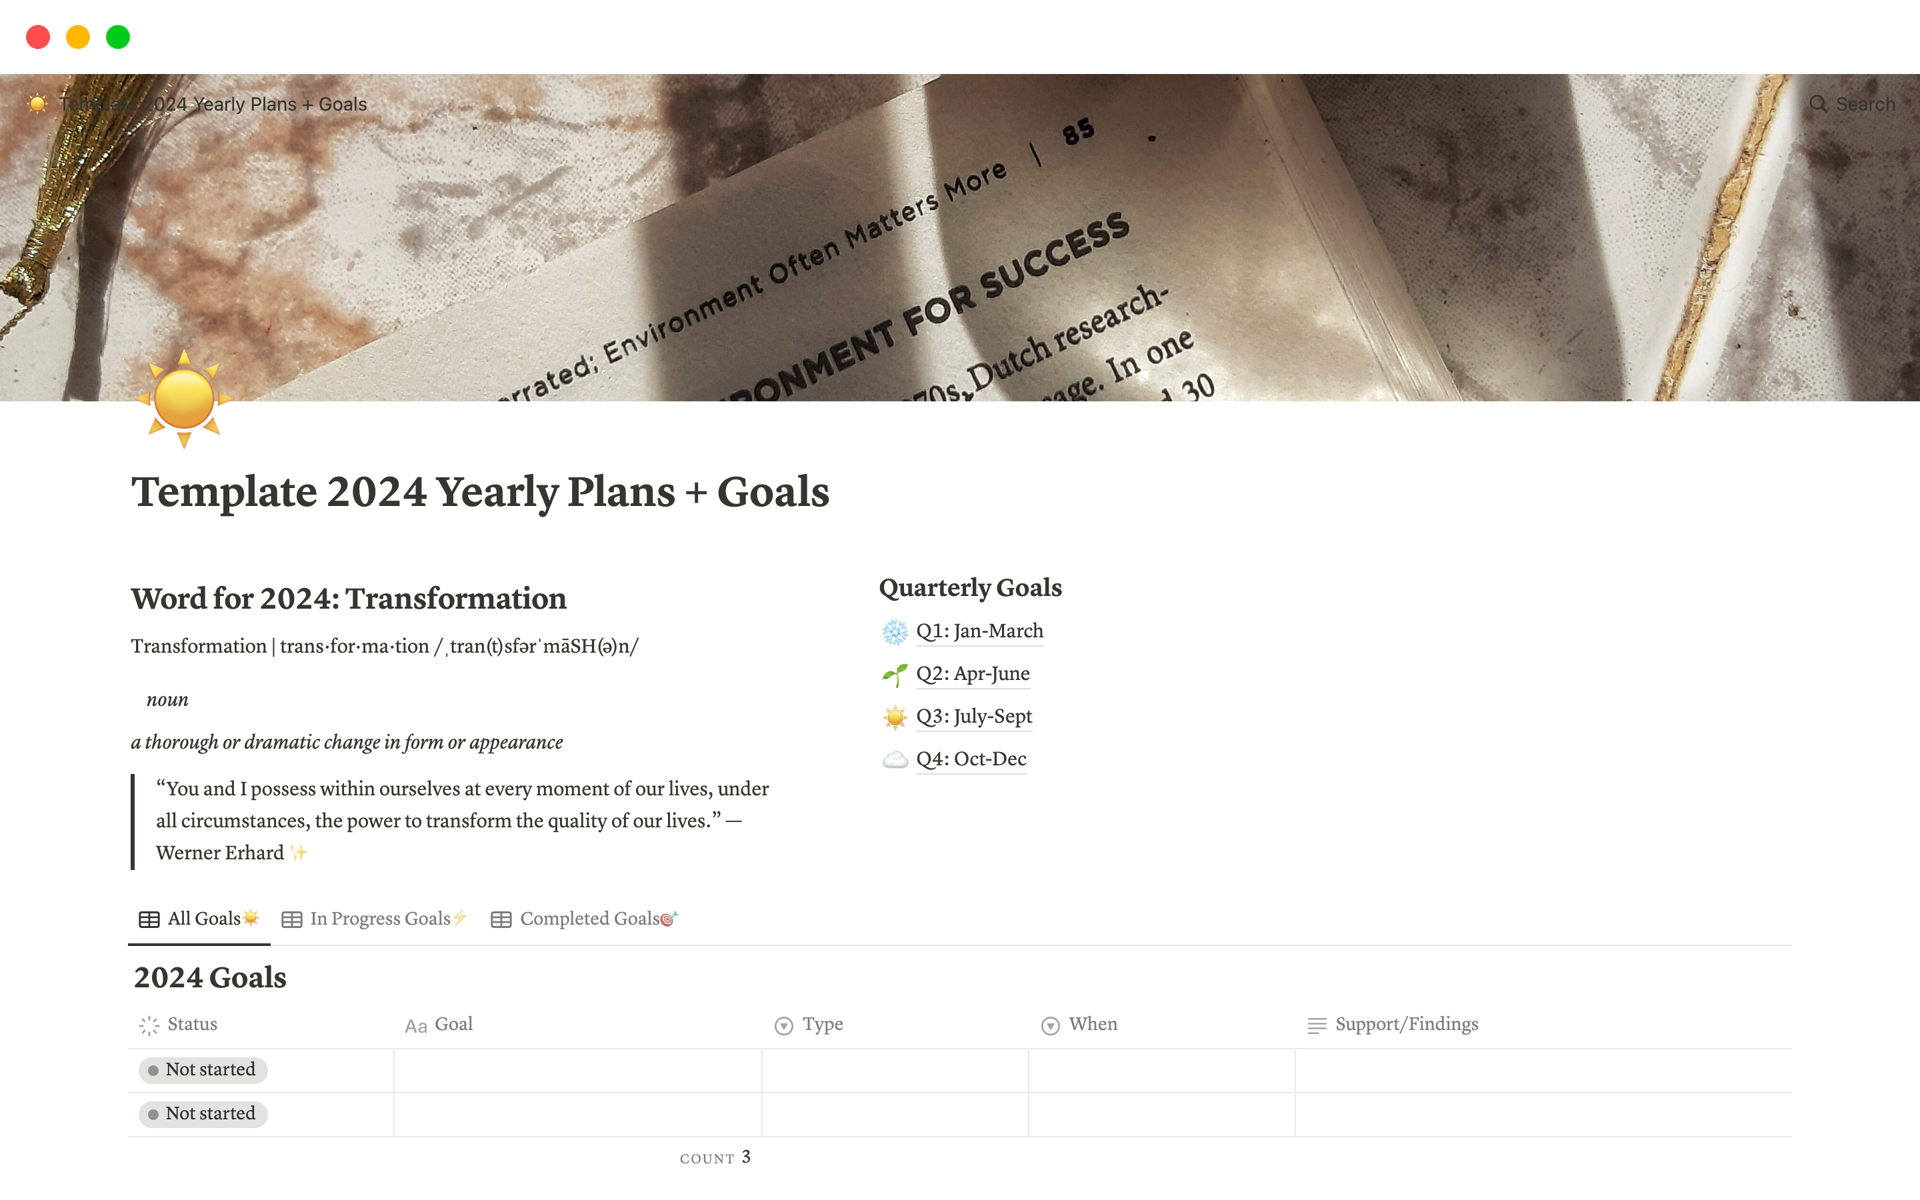 A template preview for 2024 Yearly Plans + Goals 